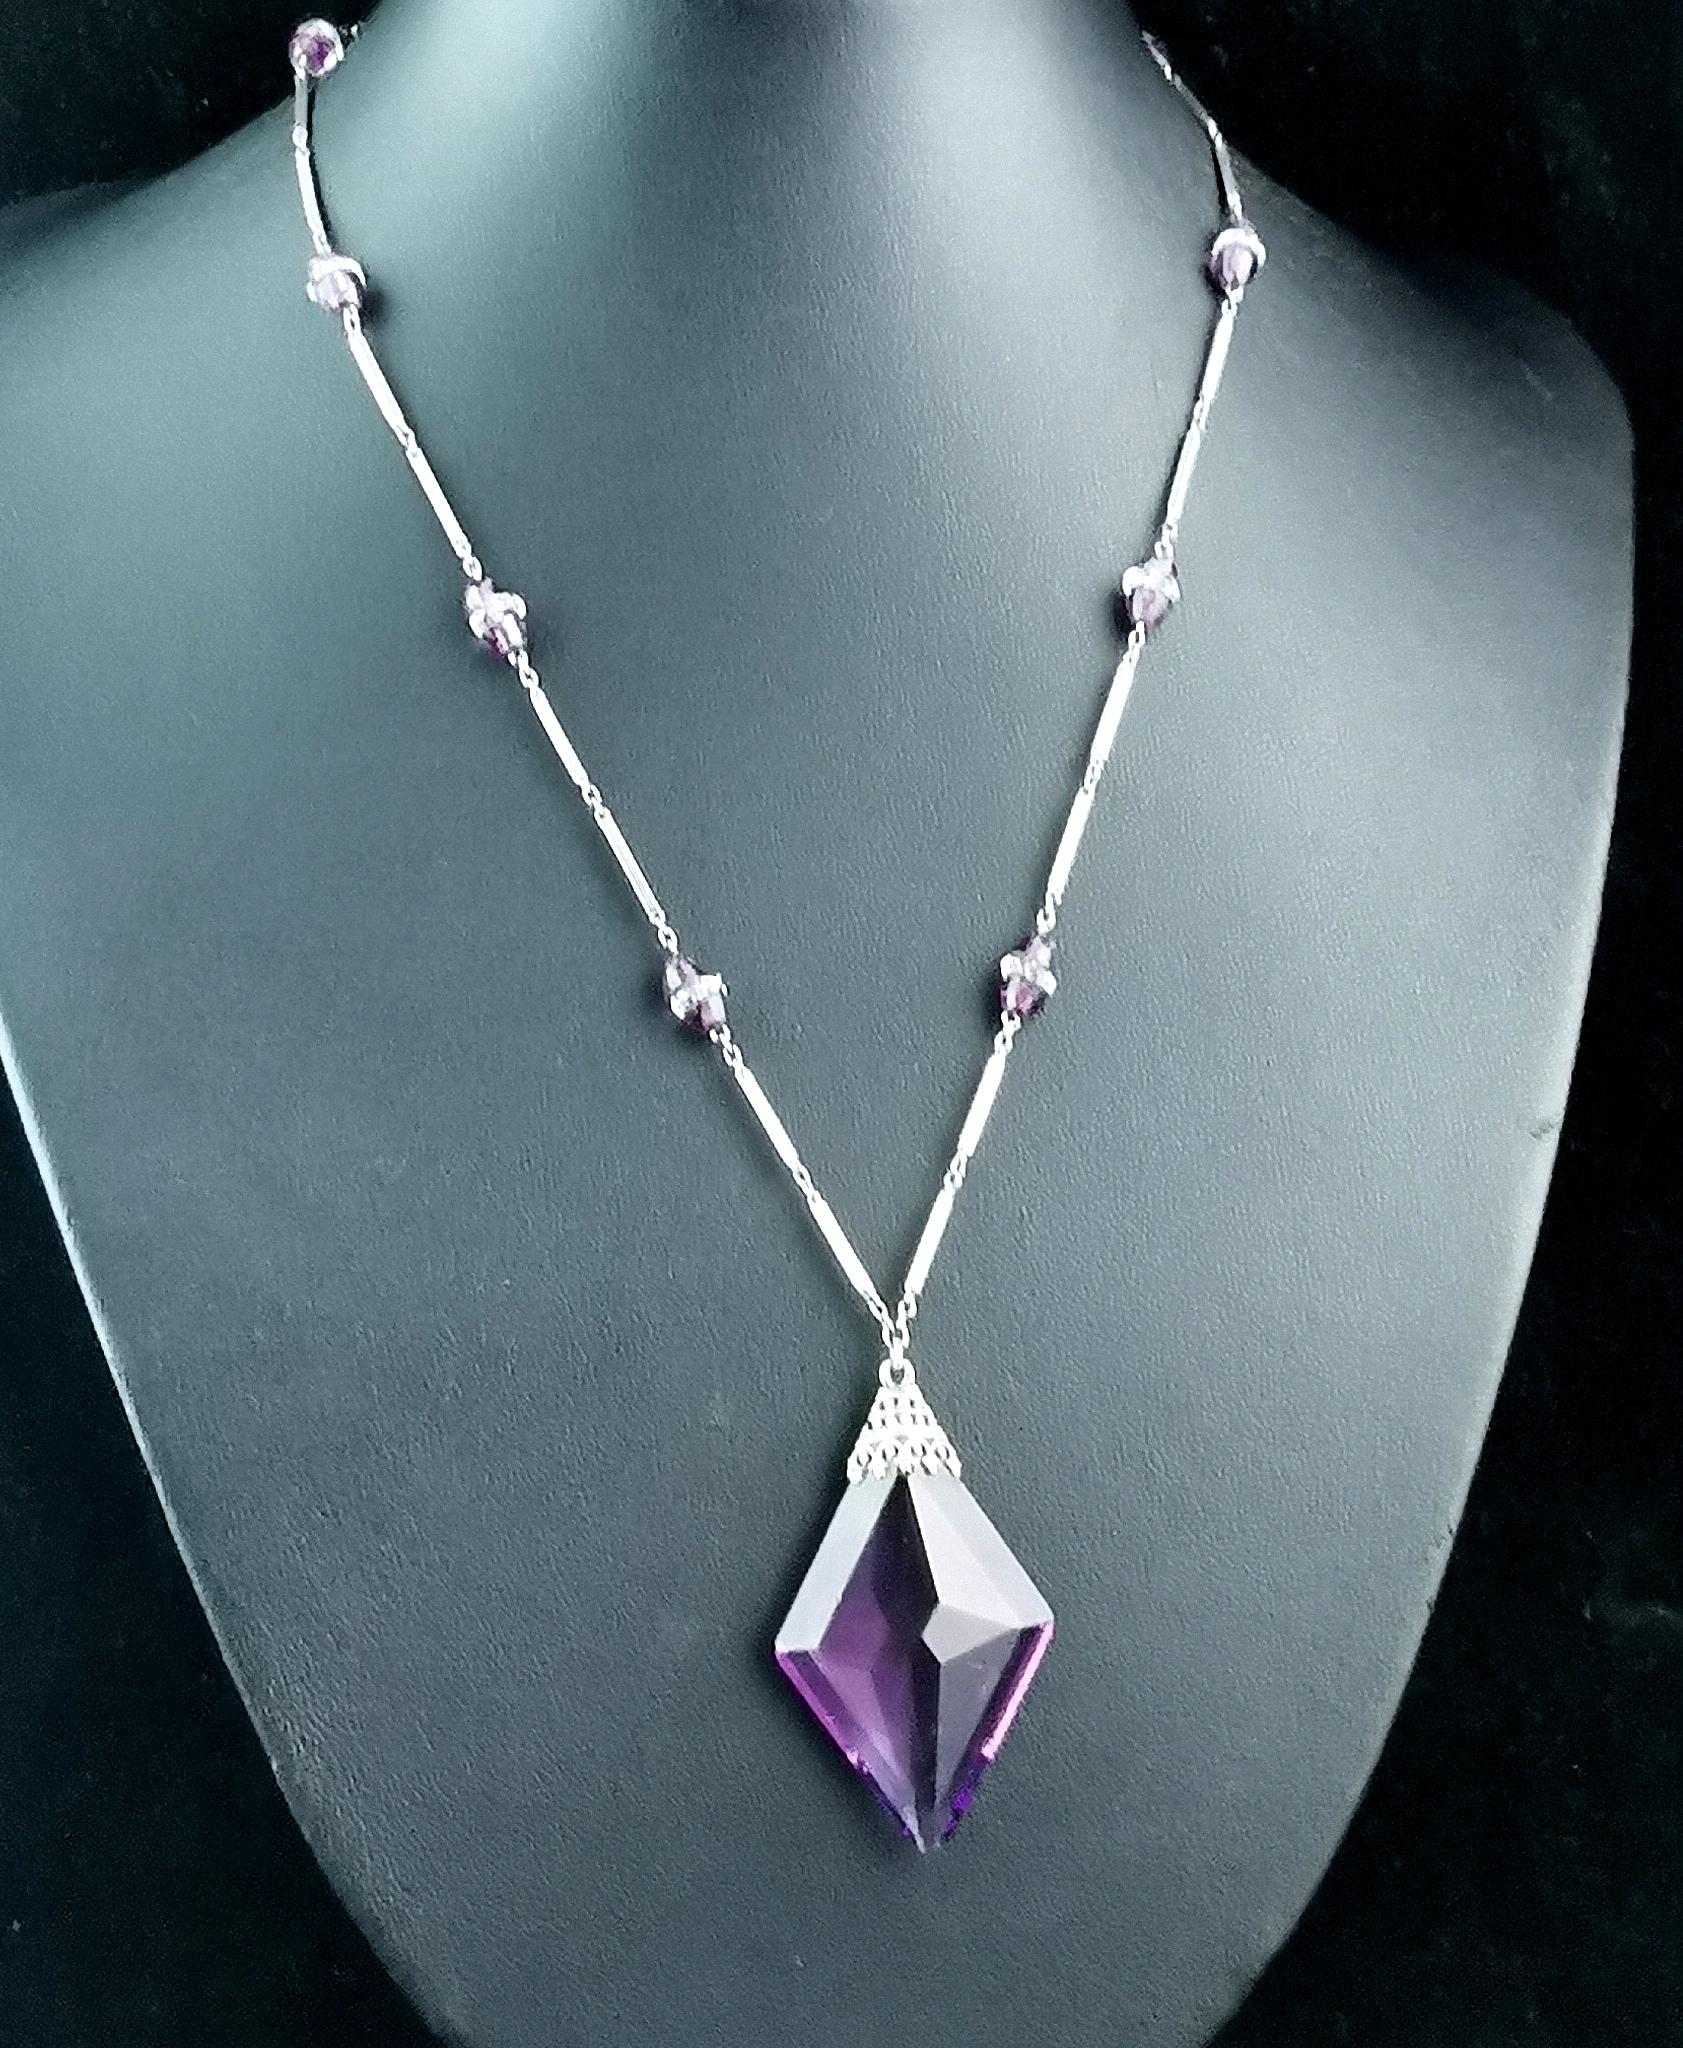 A gorgeous vintage Art Deco era Amethyst glass pendant or drop necklace.

It is a station style necklace with small Amethyst glass beads and faceted clear paste beads stationed along a fancy bar link necklace.

The necklace has a large faceted